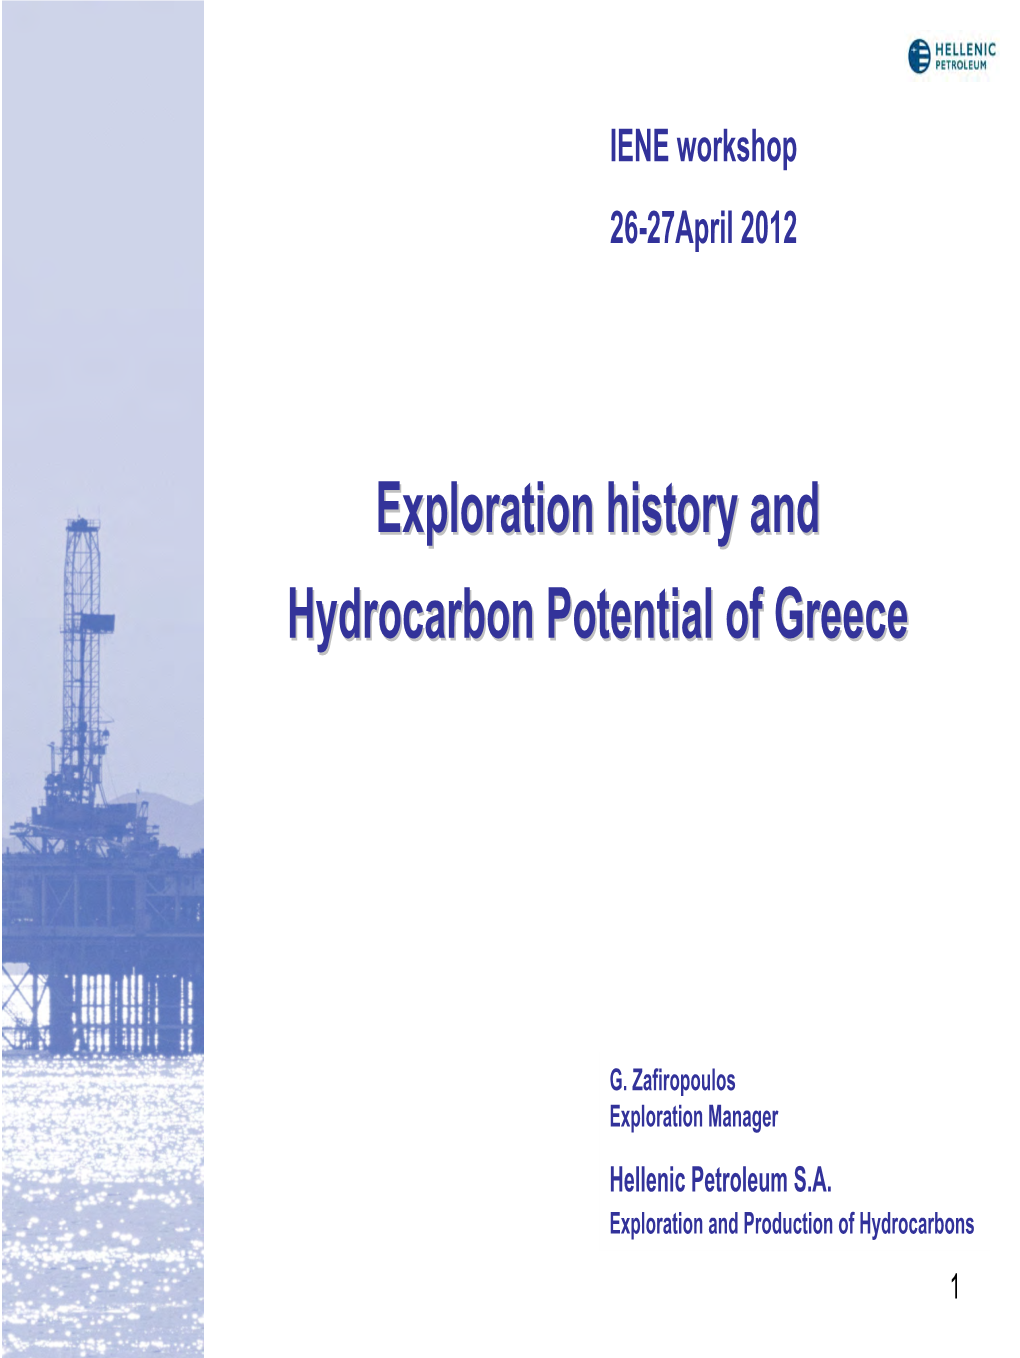 Exploration History and Hydrocarbon Potential of Greece